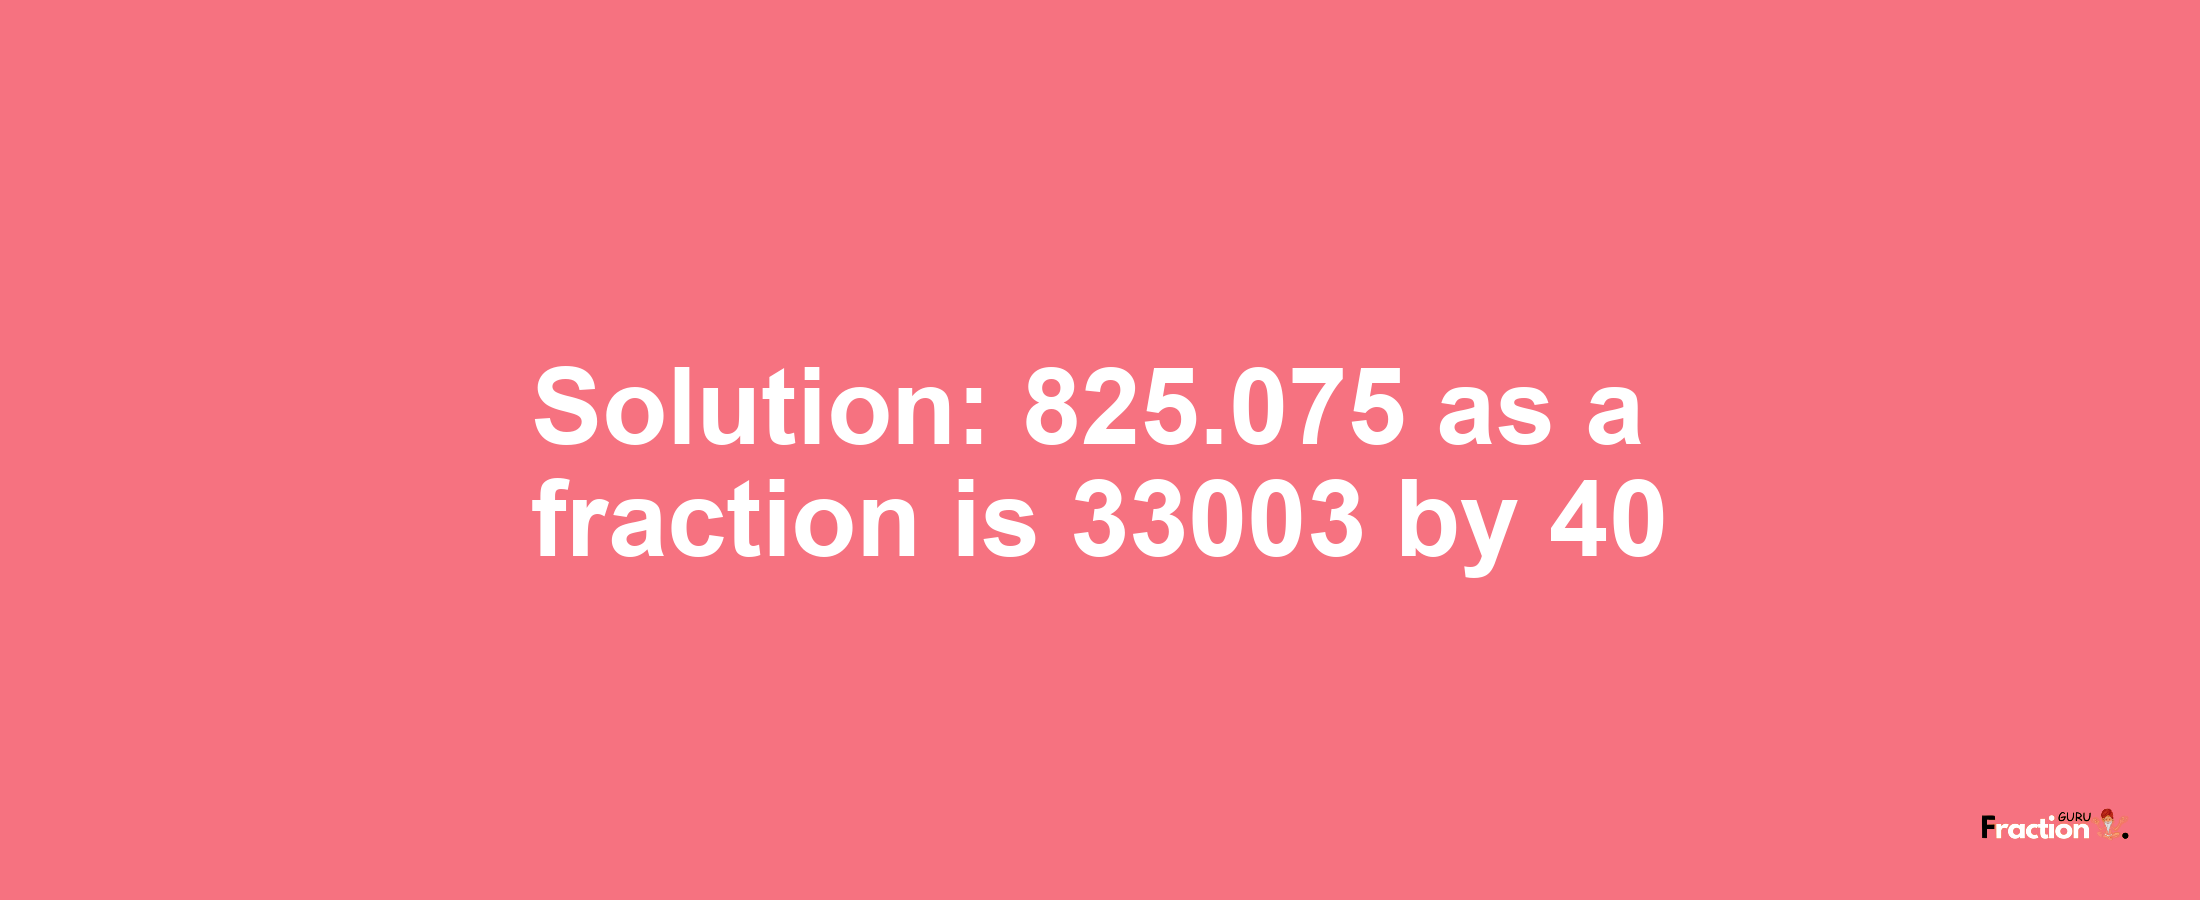 Solution:825.075 as a fraction is 33003/40